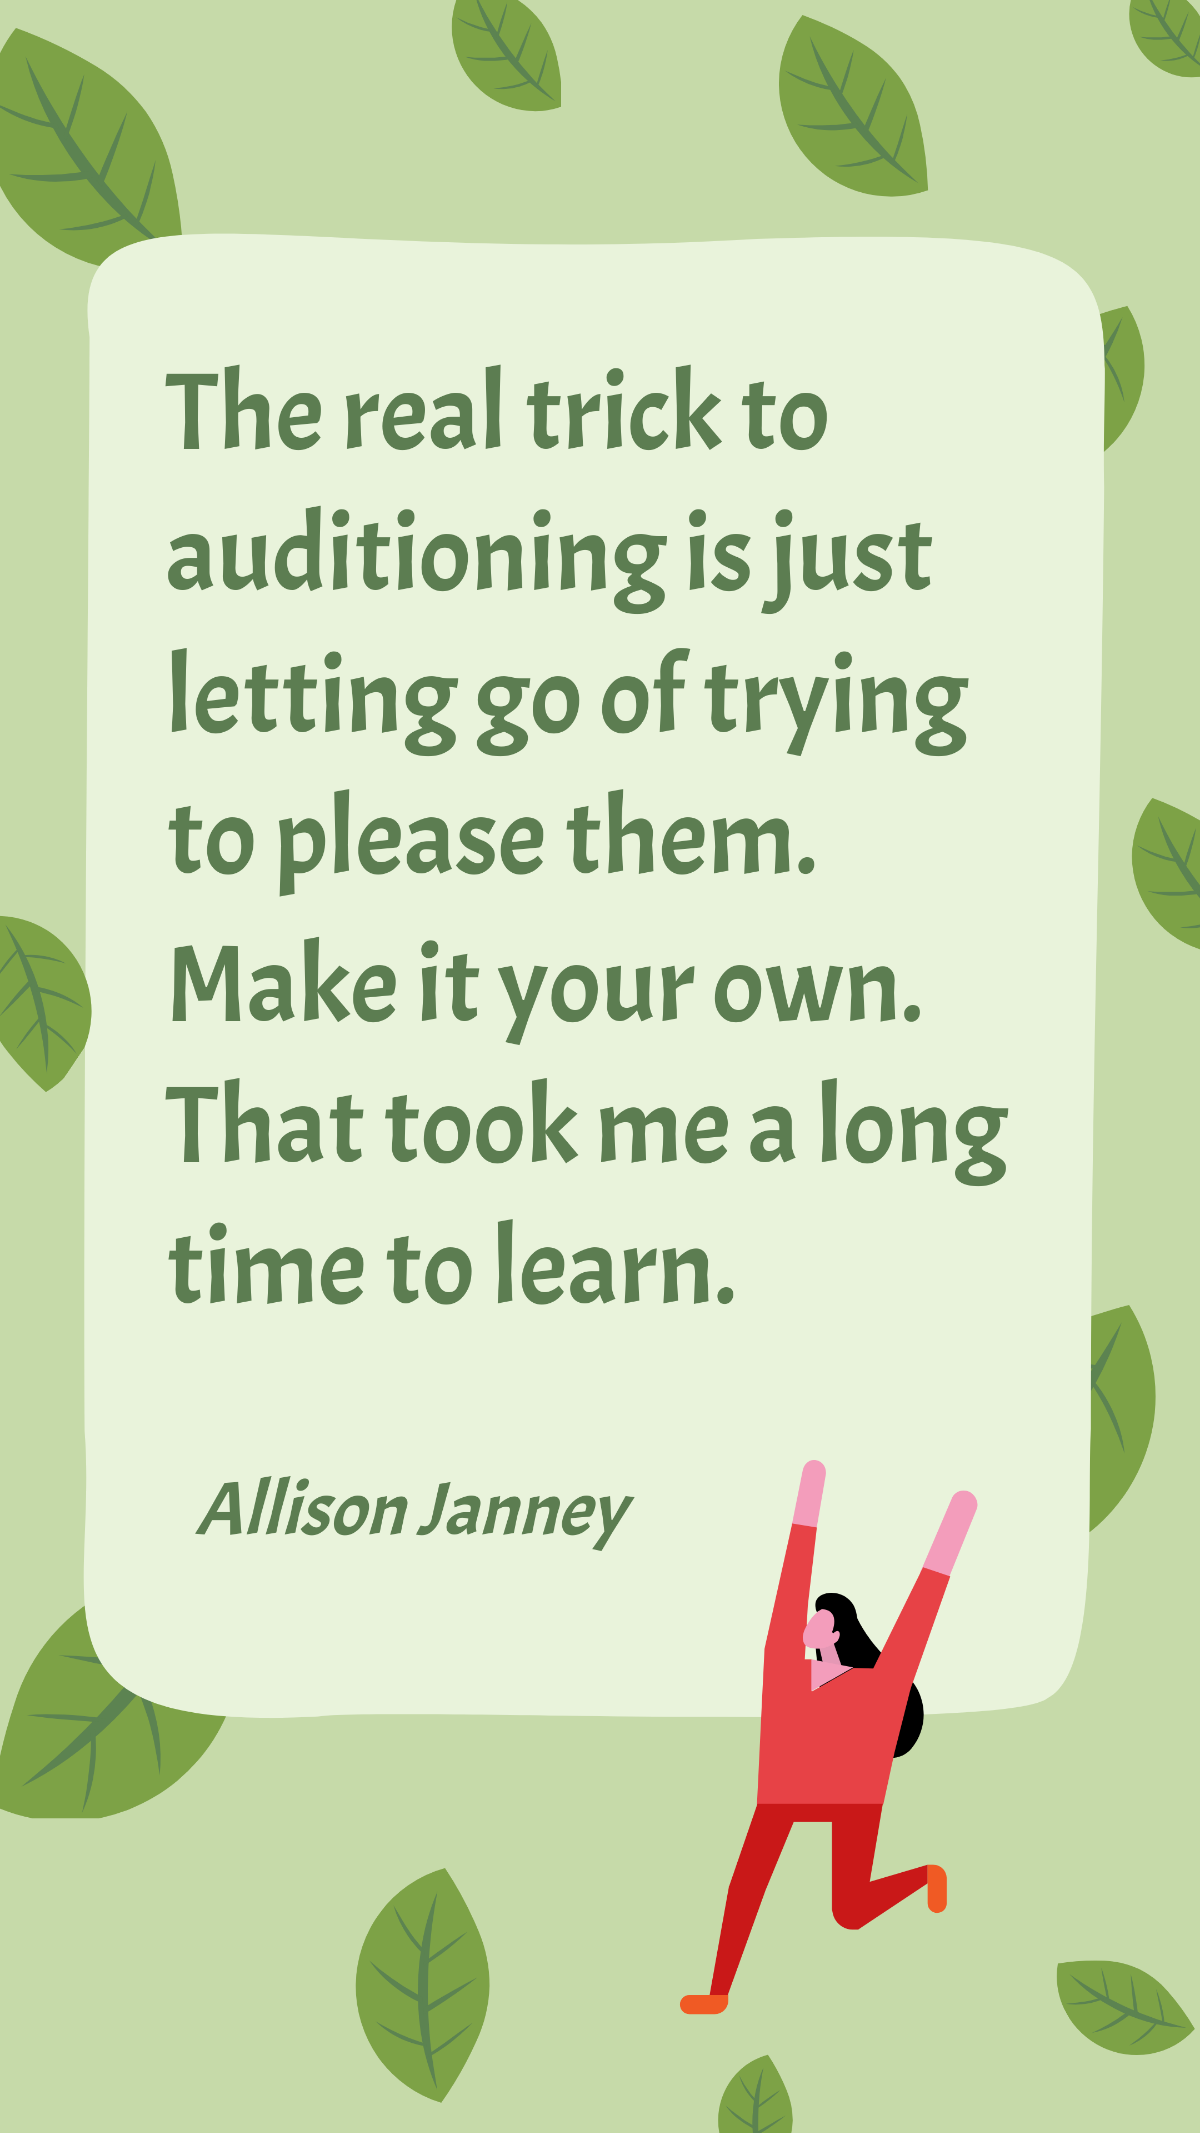 Free Allison Janney - The real trick to auditioning is just letting go of trying to please them. Make it your own. That took me a long time to learn. Template